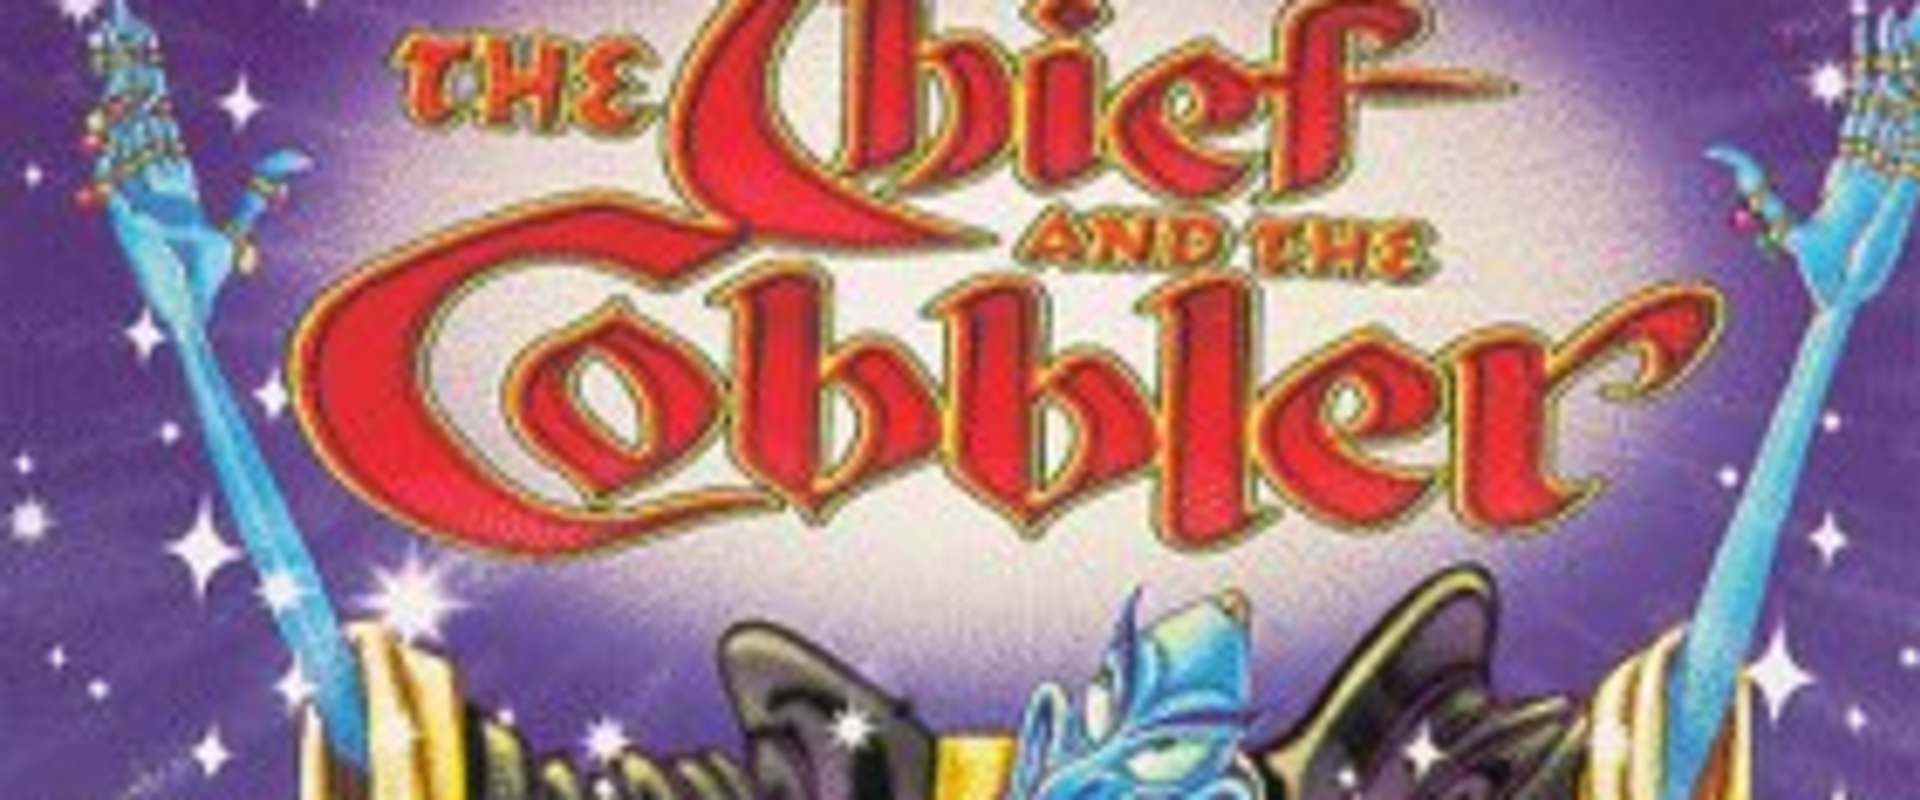 The Thief and the Cobbler background 2